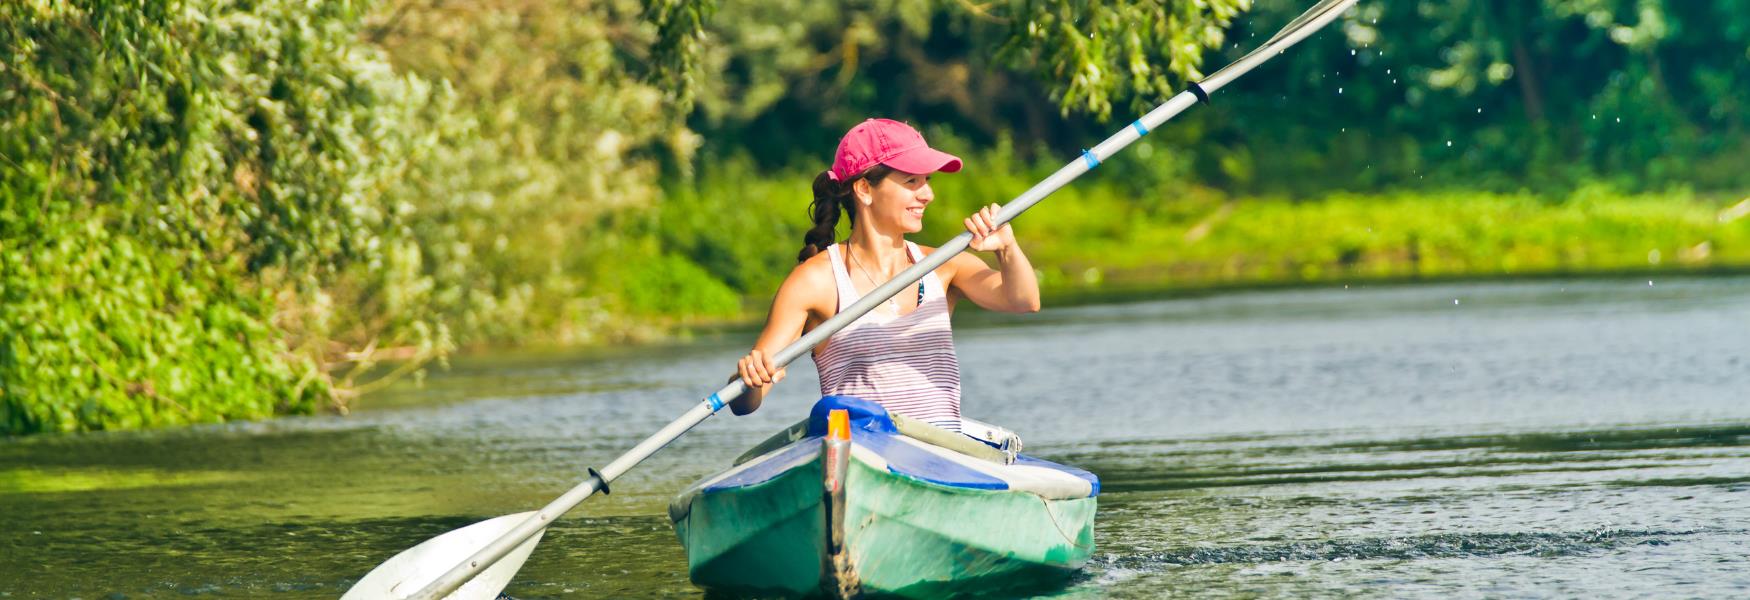 image shows a woman canoeing